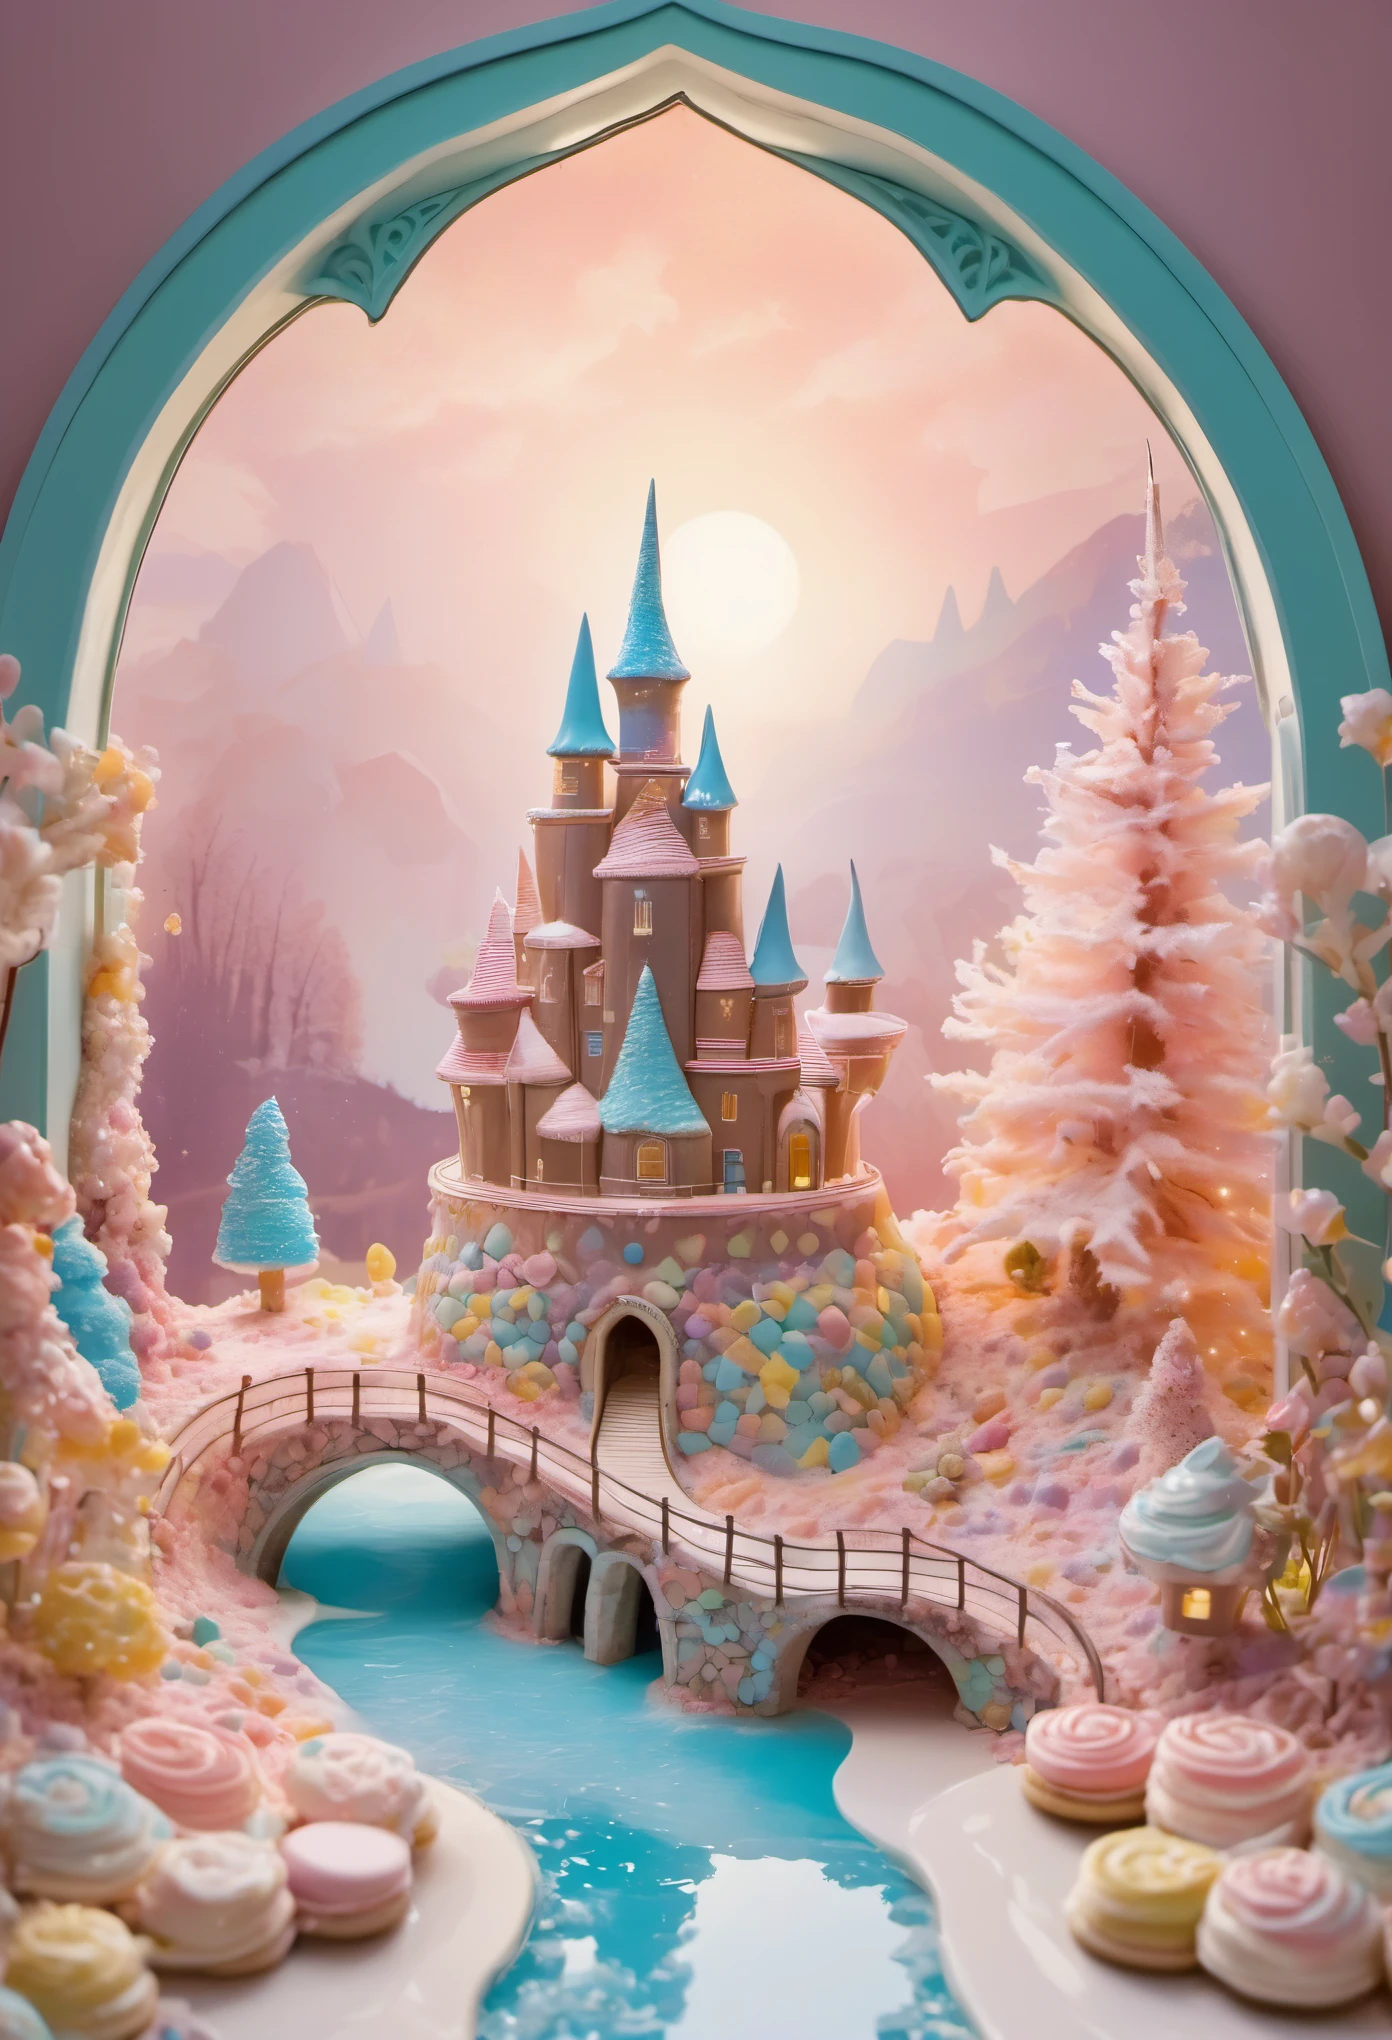 Chocolate Wall Castle, Cookies window, Marshmallow Roof,pastel colors, Fantasy lights, fantasy setting, Sweet, Charming atmosphere, Mouthwatering details, Complex buildings, Magical environment, Sweet joy, Vibrant and whimsical, Fairytale landscape, visually stunning, exquisite craftsmanship, Pleasing beauty, Exquisite sugar sculpture, Pleasing texture, Creamy smooth, indulgent treat, Candy heaven, Sweet and seductive, Sweet wonderland, Delicious and magical.